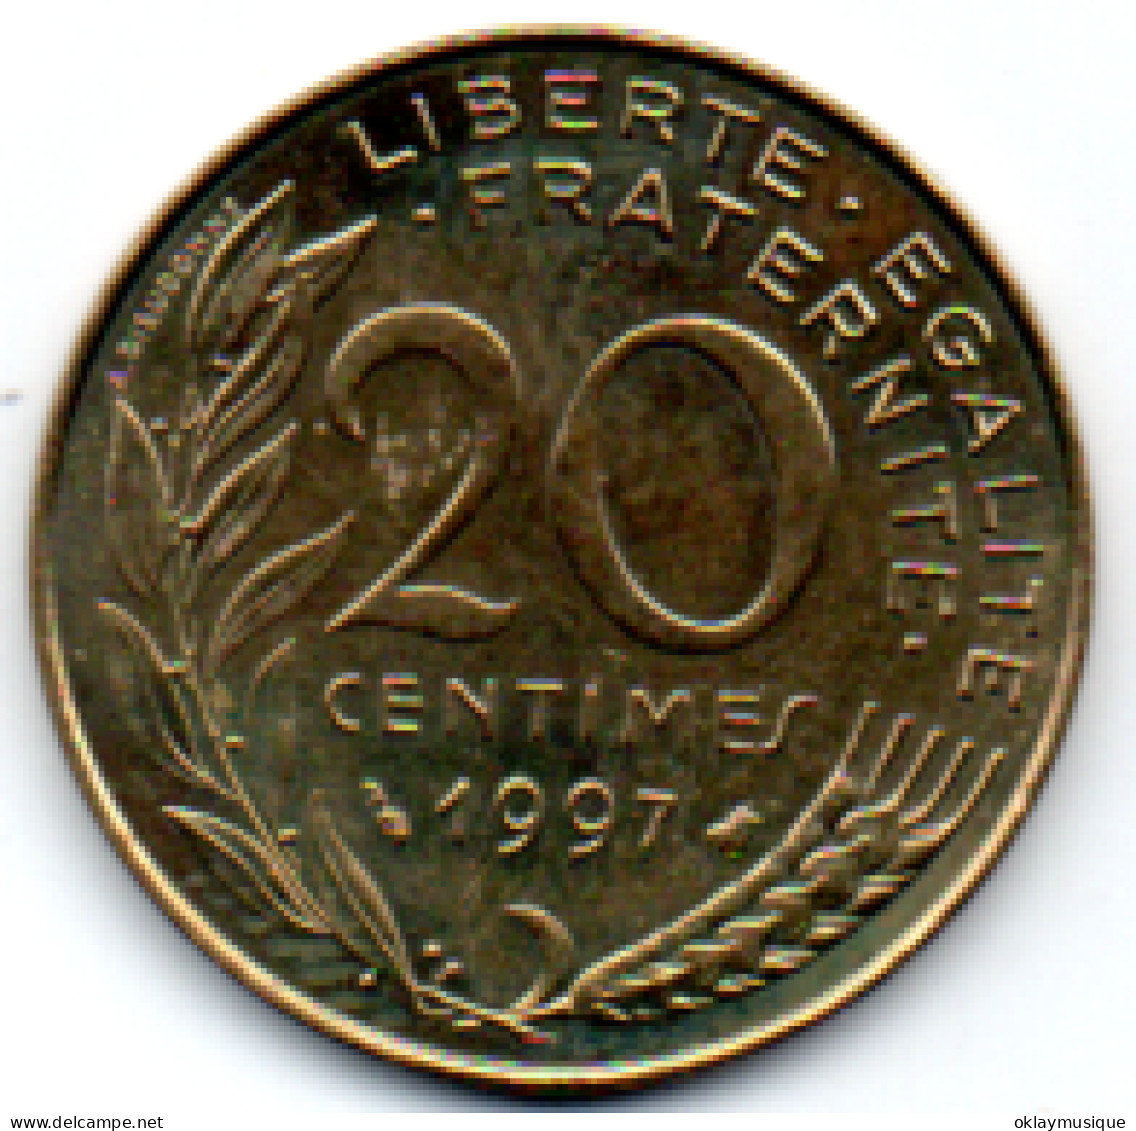 20 Centimes 1997 Serie Marianne - 20 Centimes